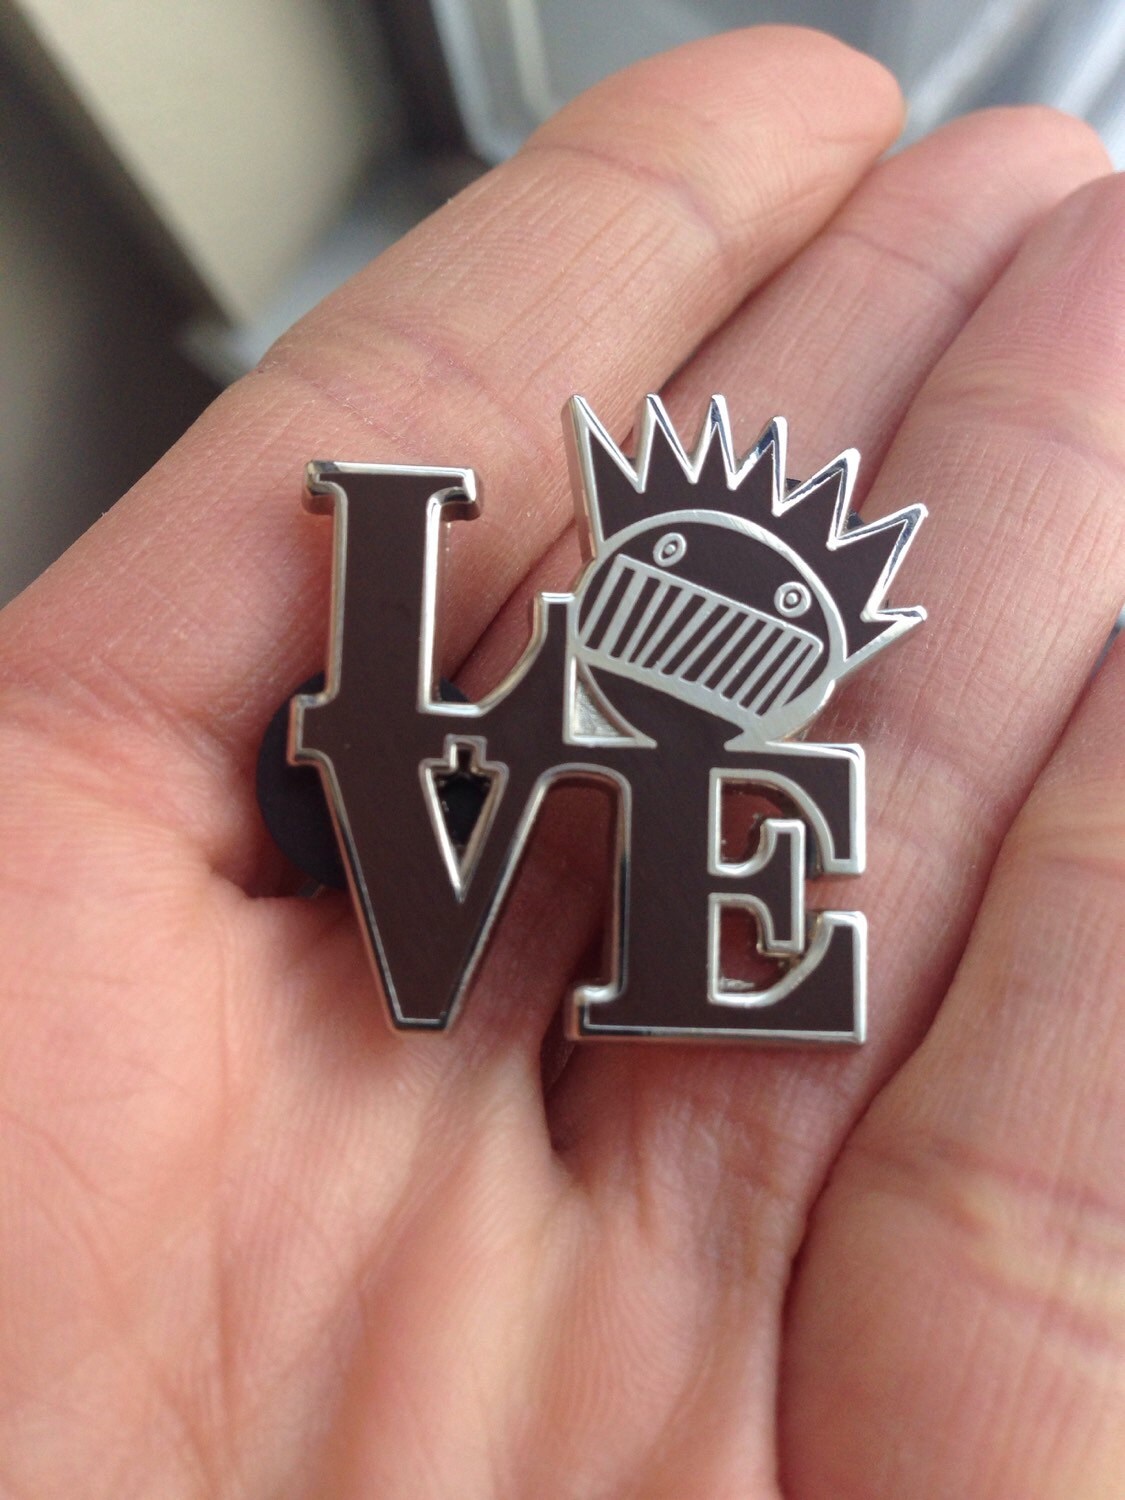 Brown Ween Boognish Love pin